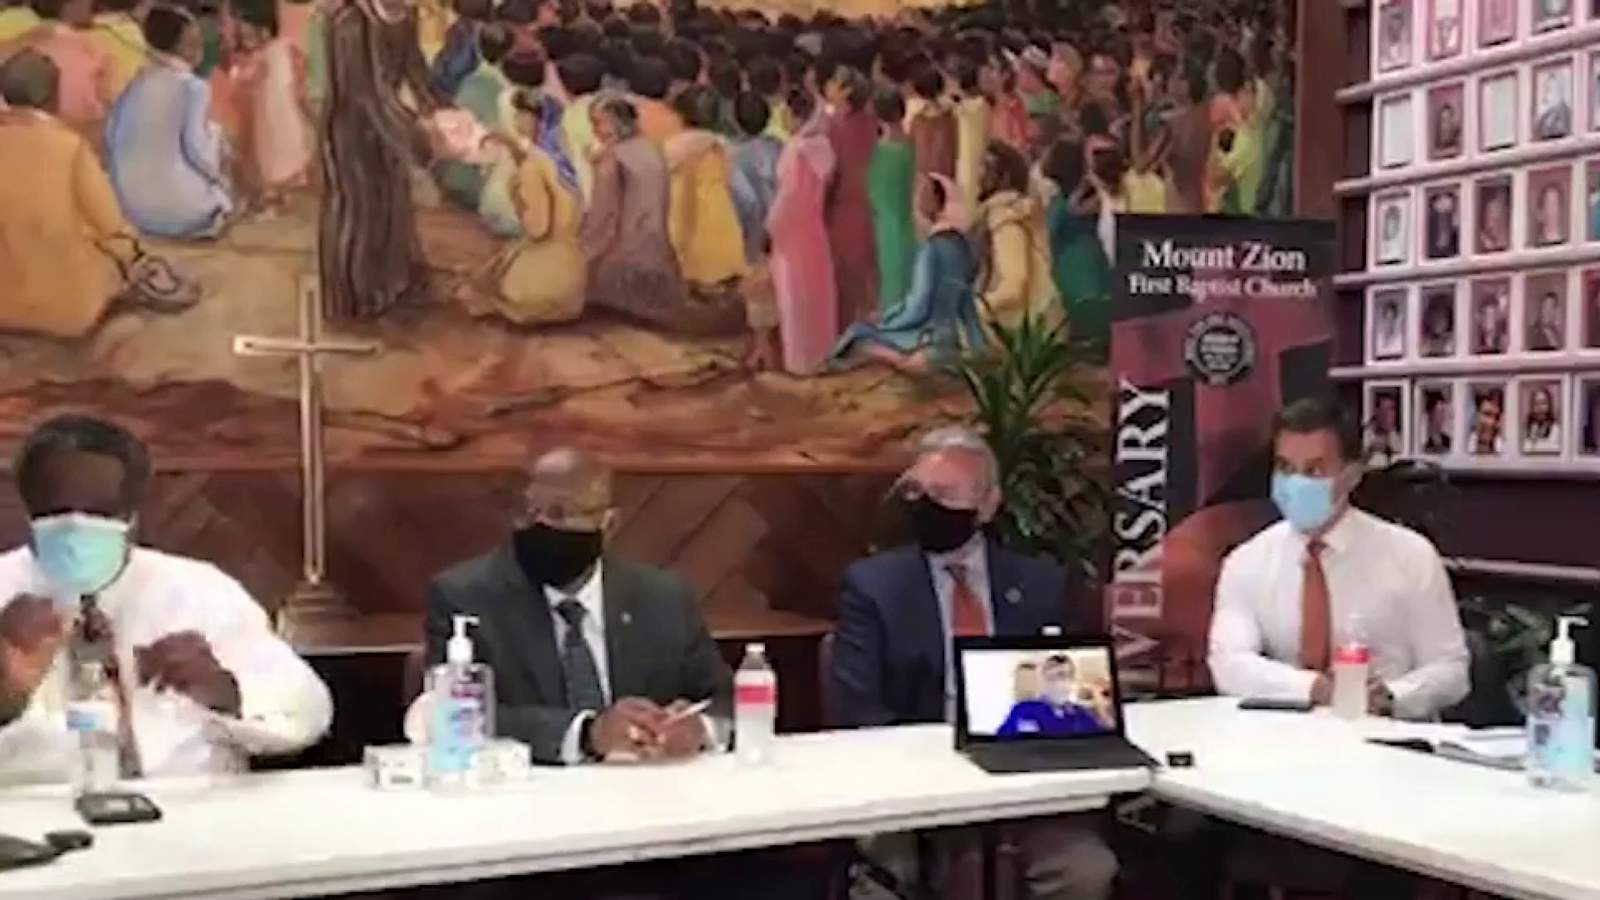 NAACP San Antonio members, law enforcement officers come together for Call to Action town hall